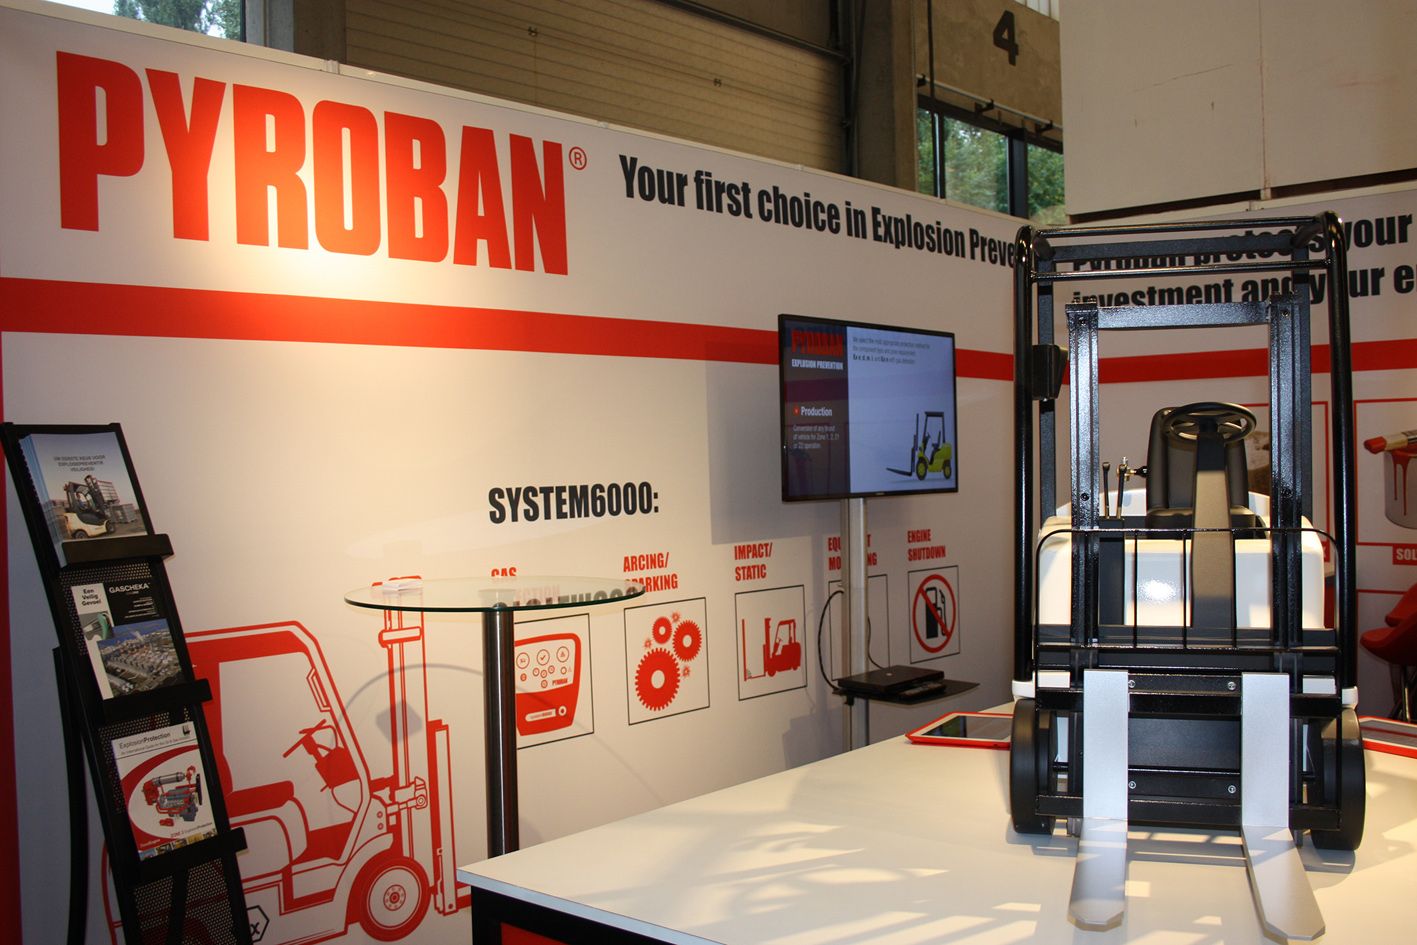 pyroban-explosion-protection-at-transport-and-logistics-antwerp-expo_a